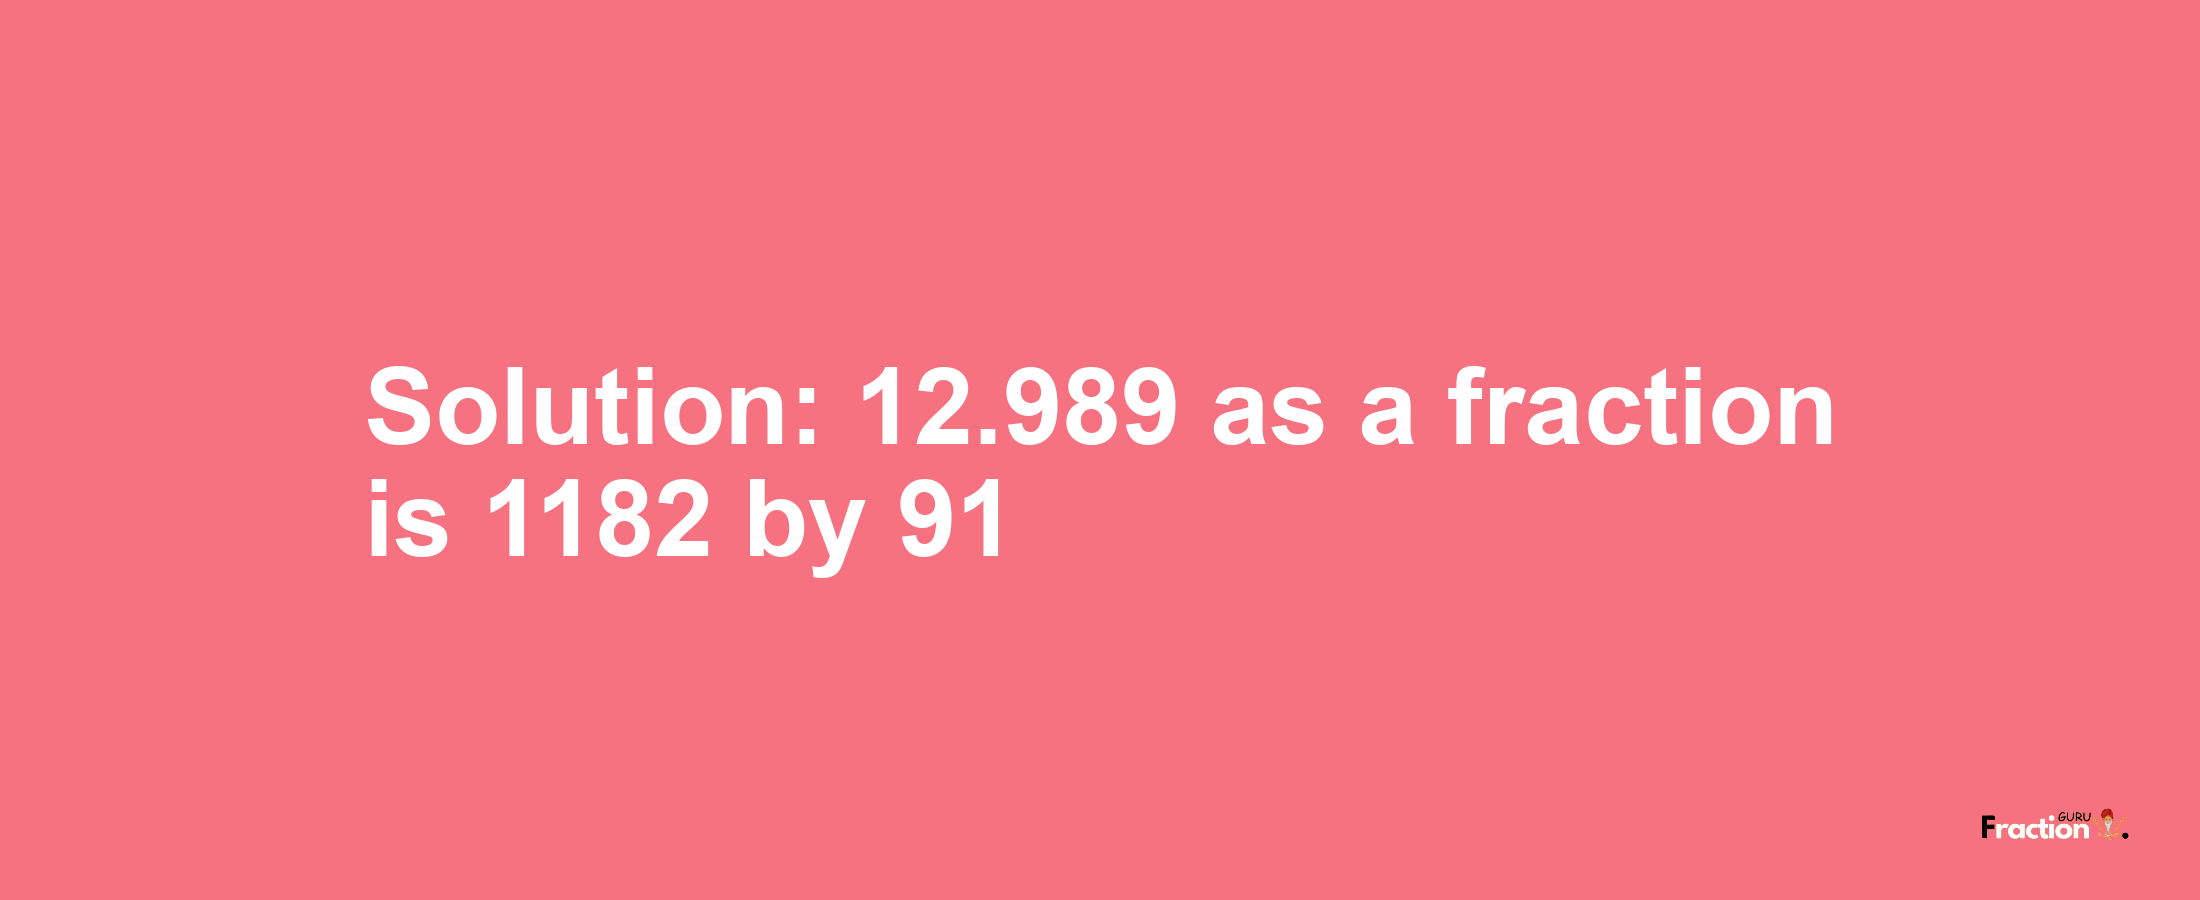 Solution:12.989 as a fraction is 1182/91